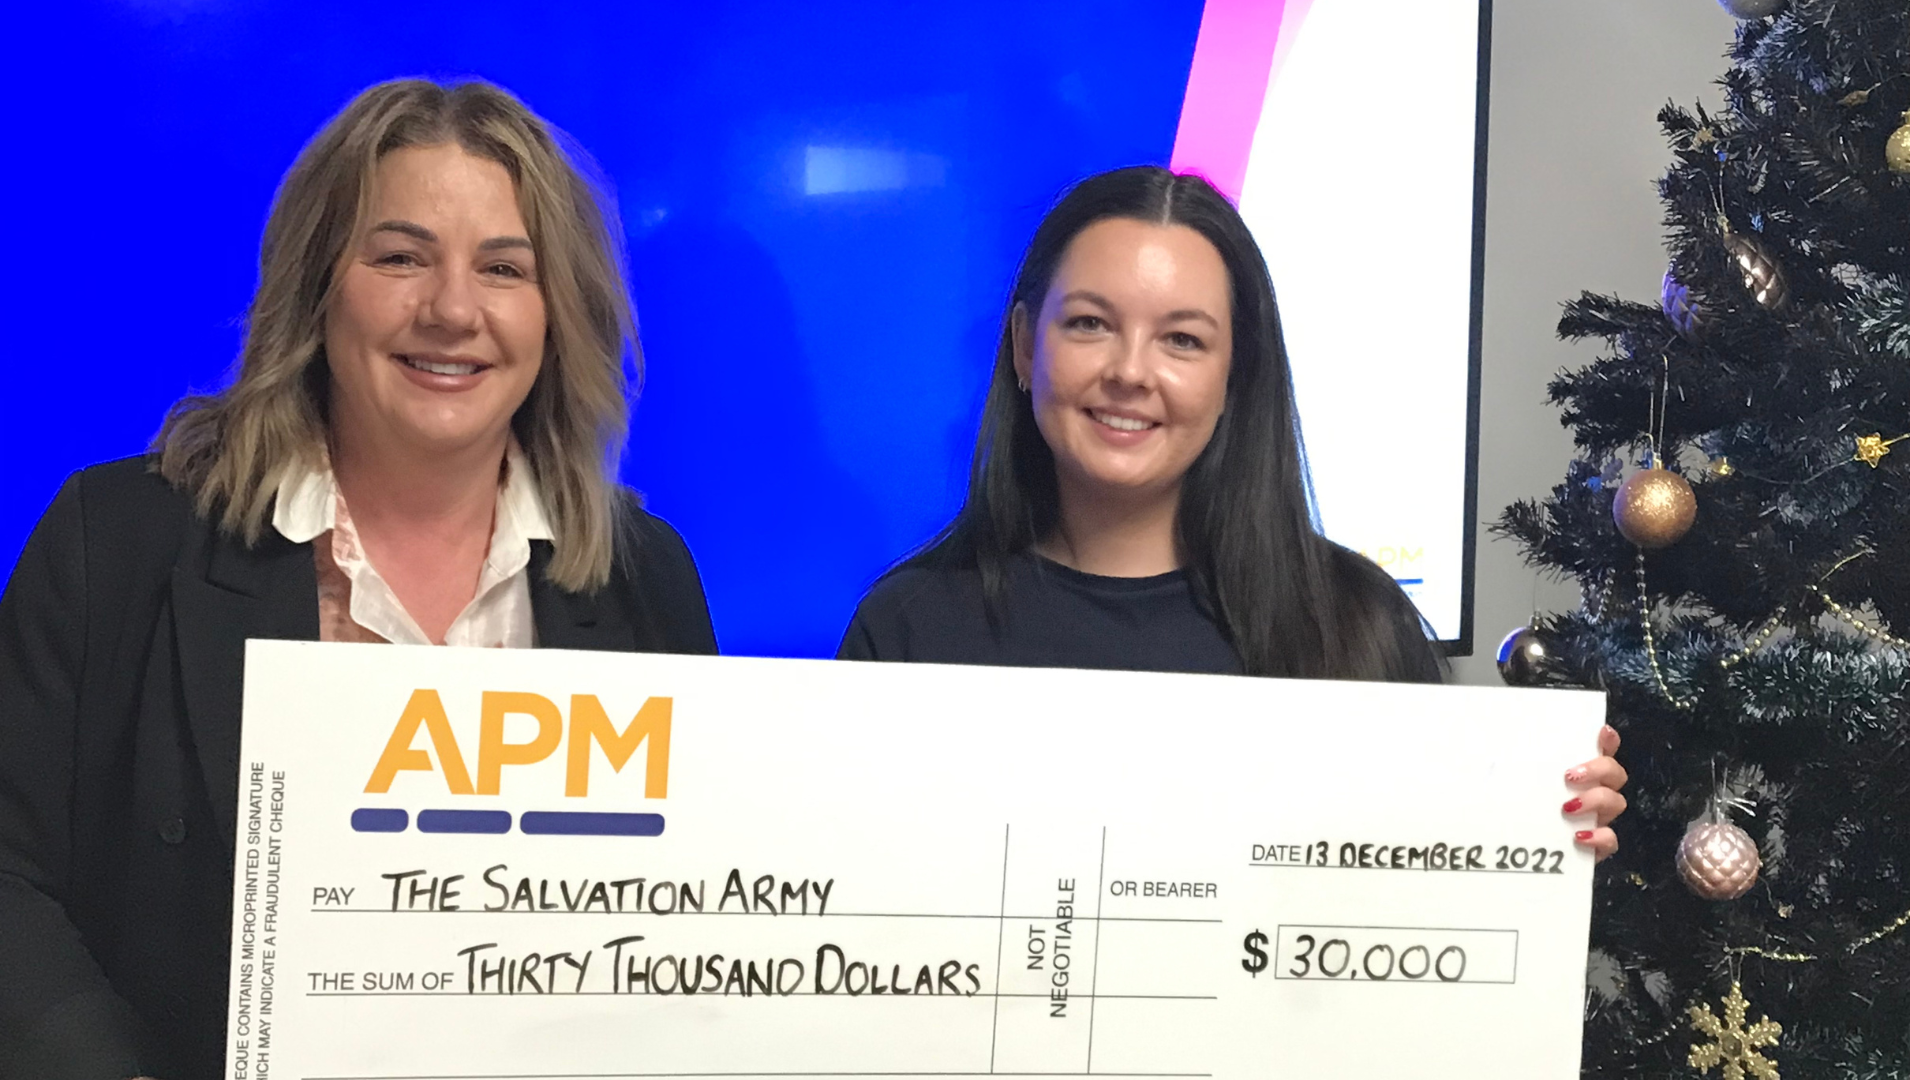 APM CEO of Employment Services Karen Rainbow and Grace Lacy from the Salvation Arm y are pictures together holding a cheque for $30,000